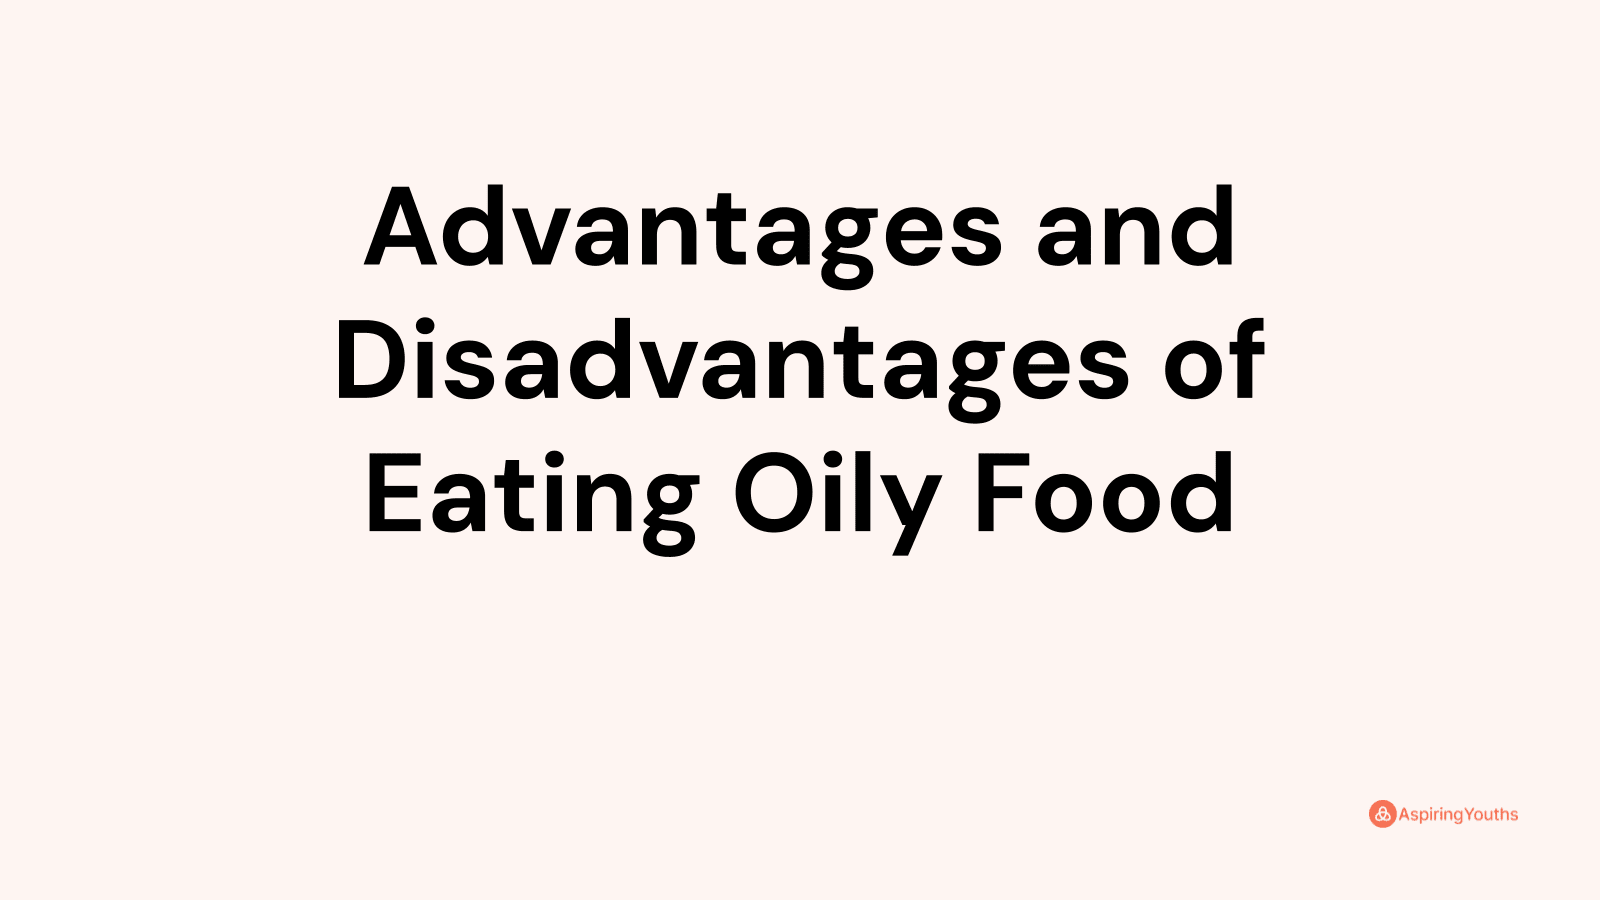 Advantages and disadvantages of Eating Oily Food